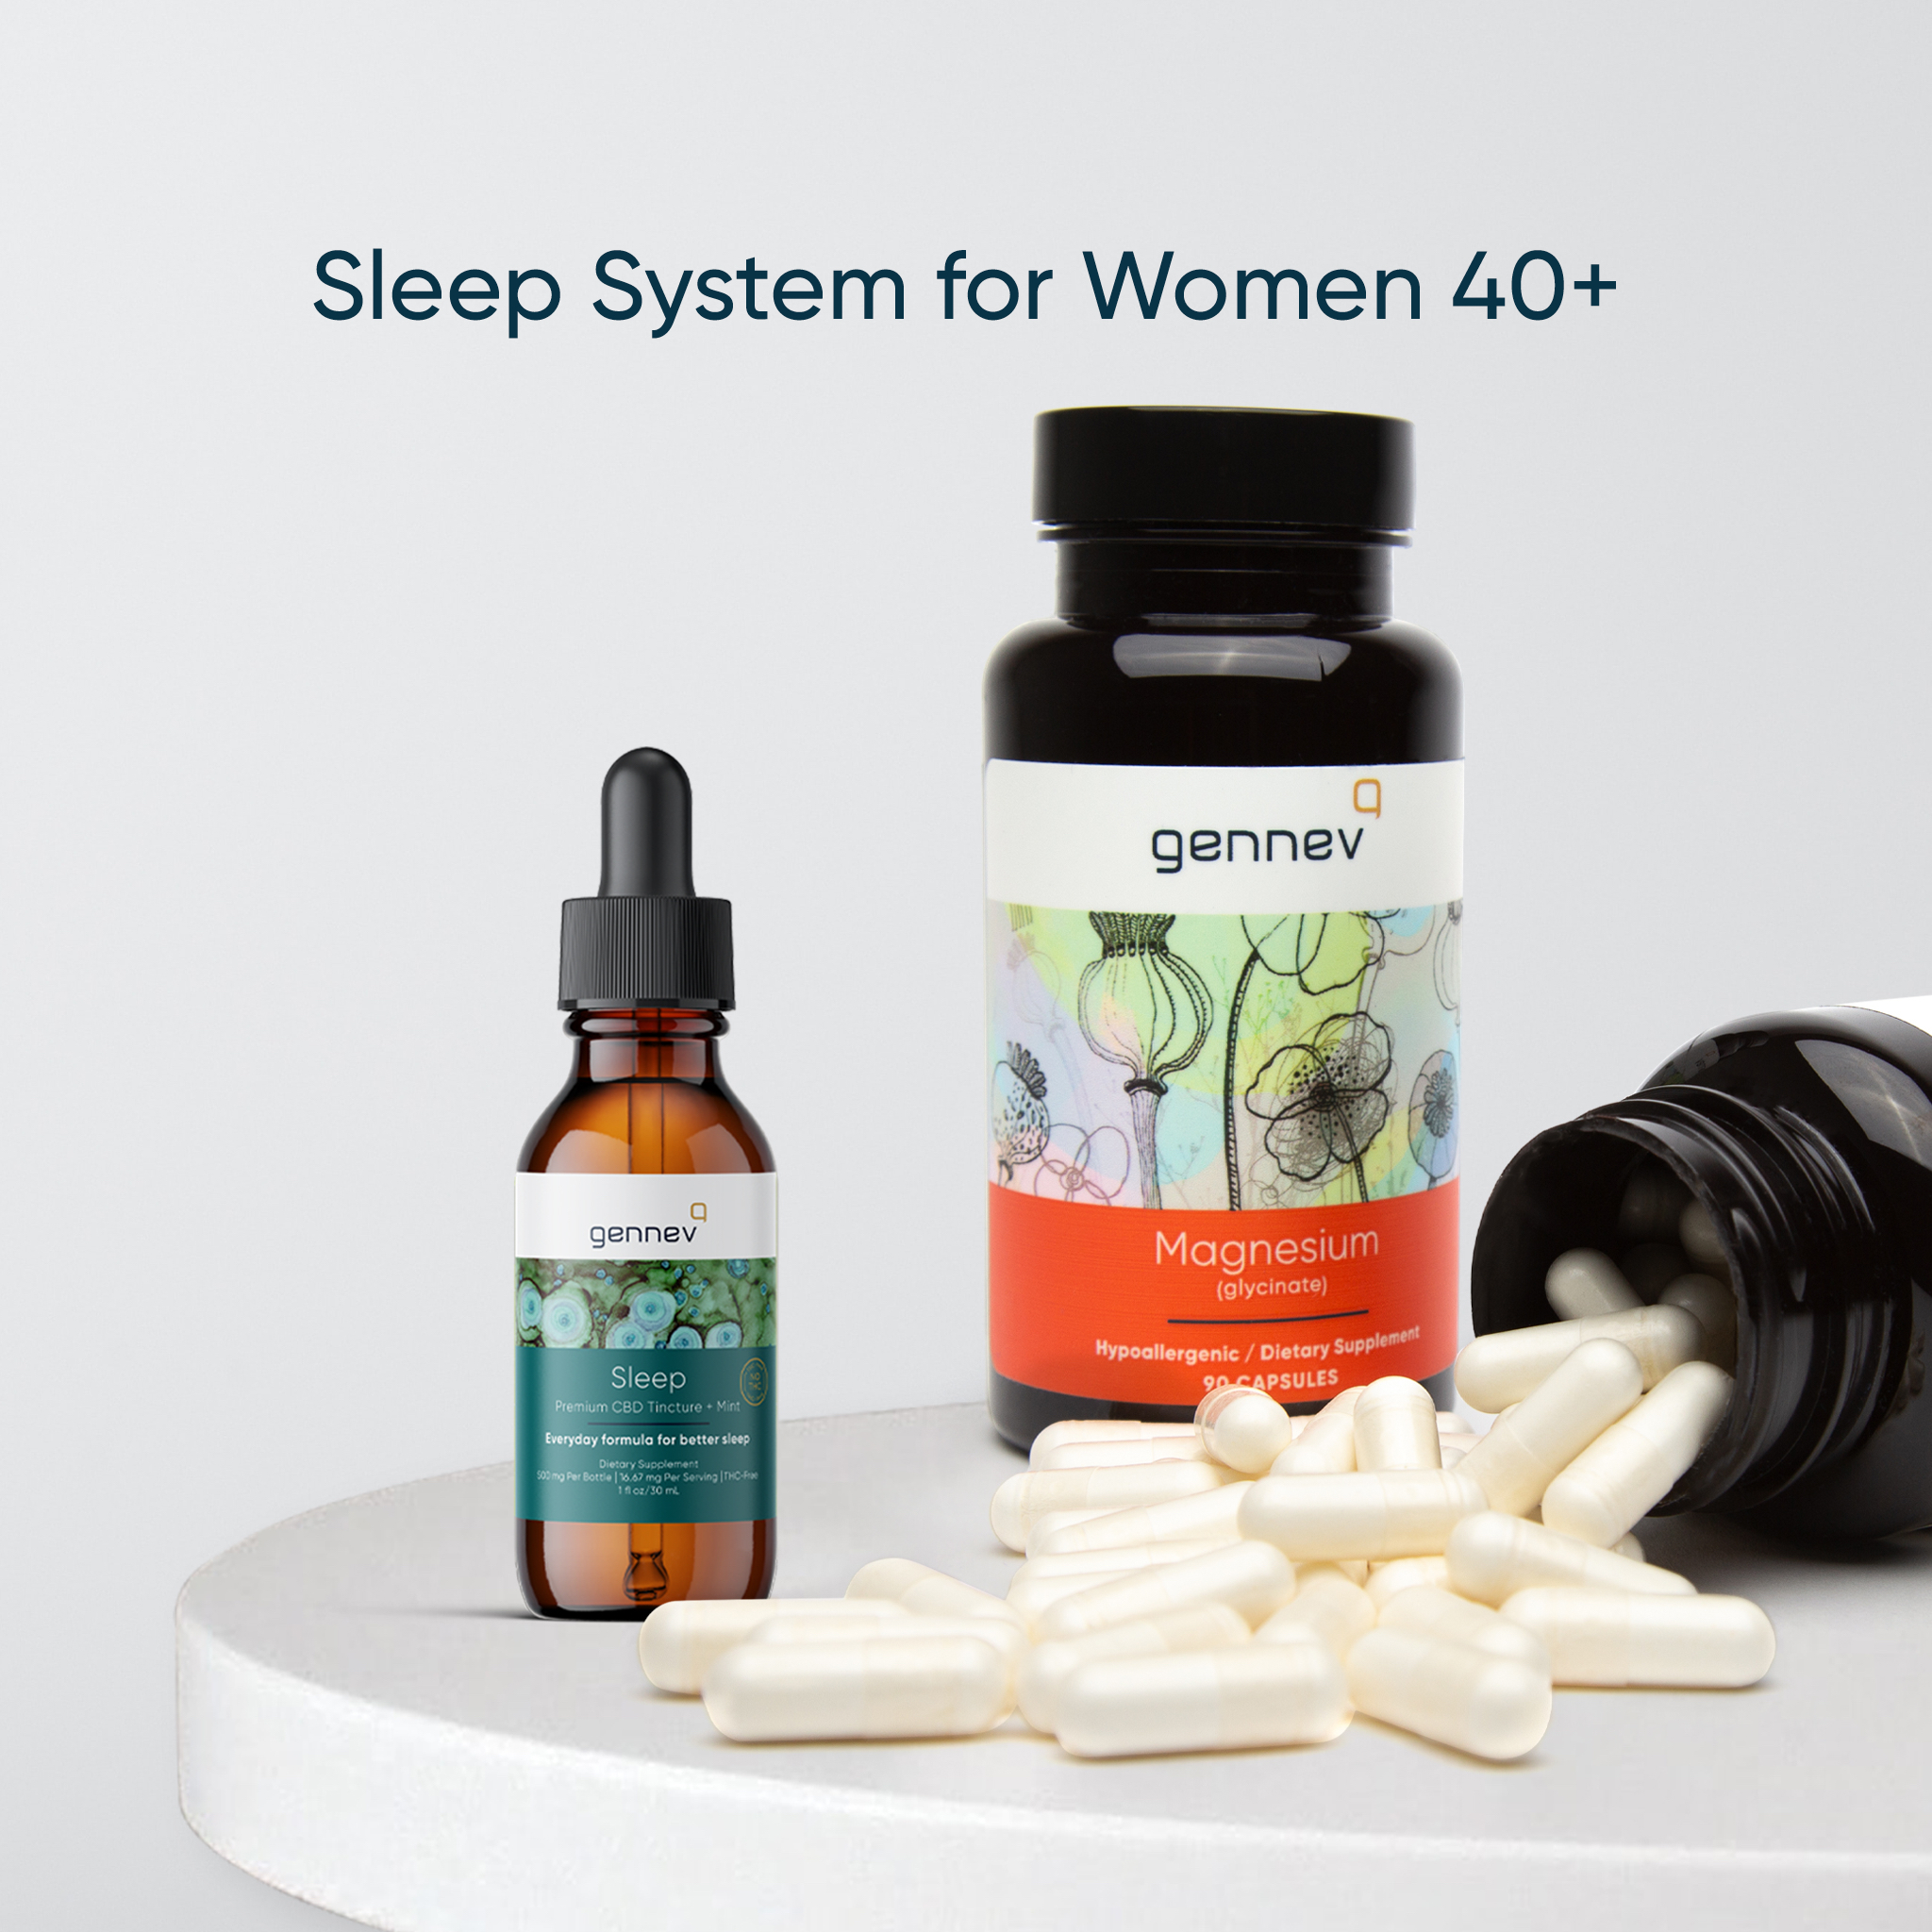 The Gennev Sleep System is designed to offer an easy-to-follow regimen for women struggling to fall asleep and stay asleep